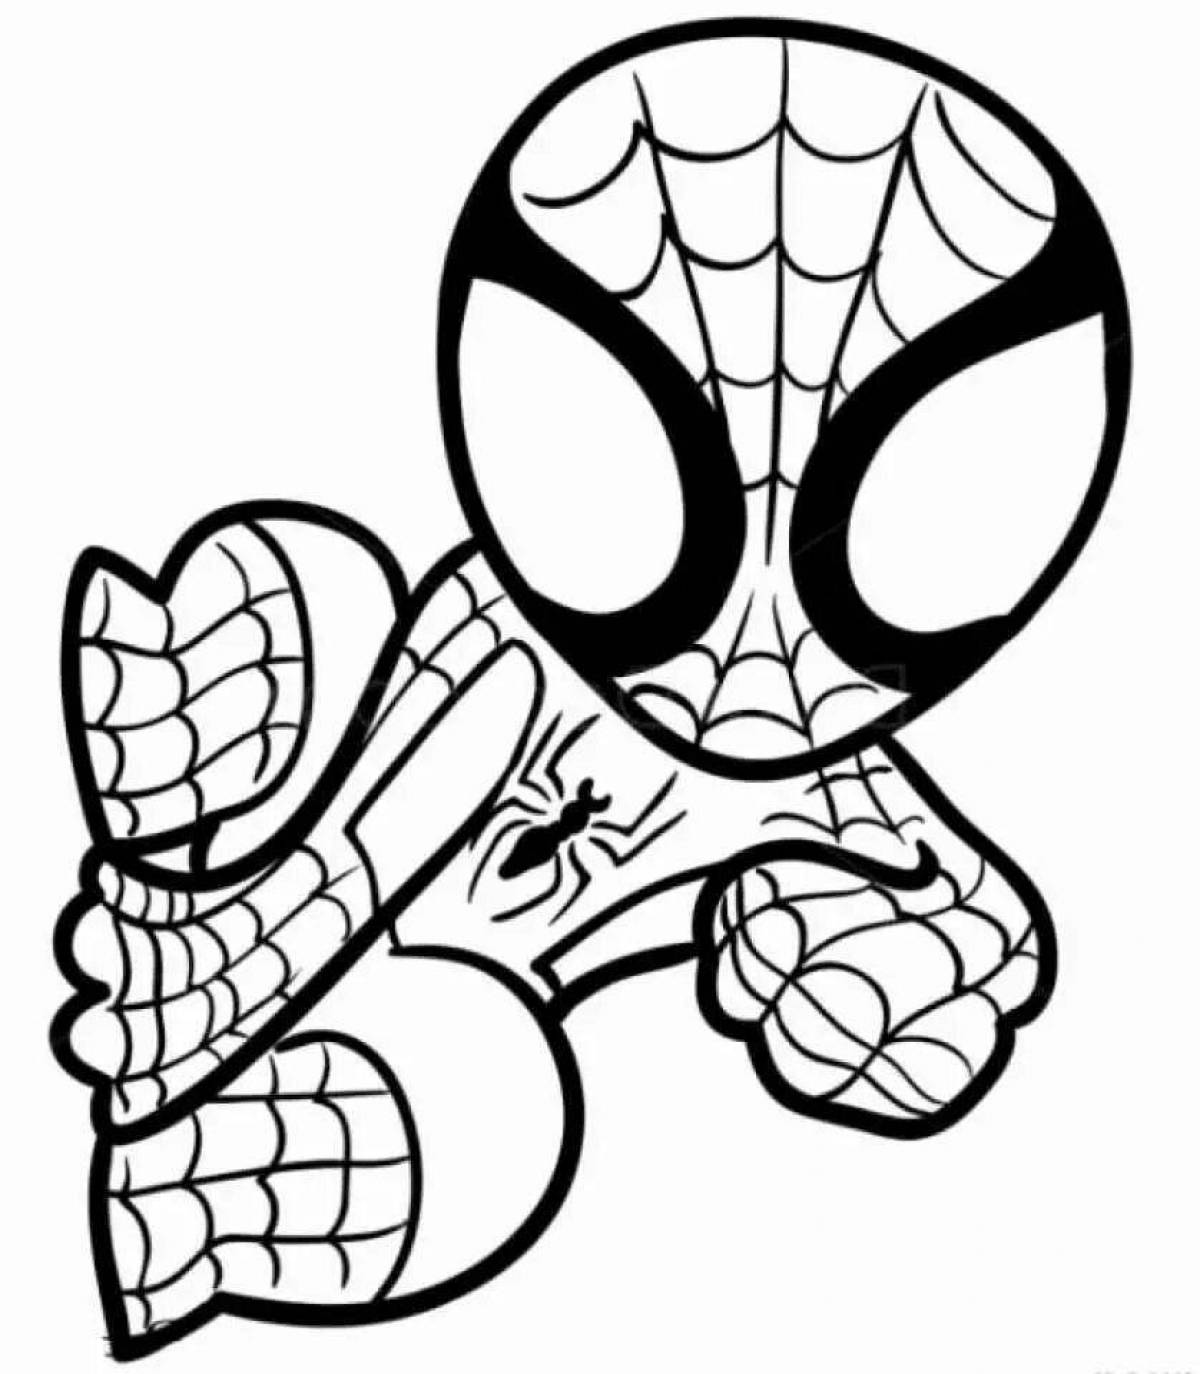 Spiderman's fancy coloring book